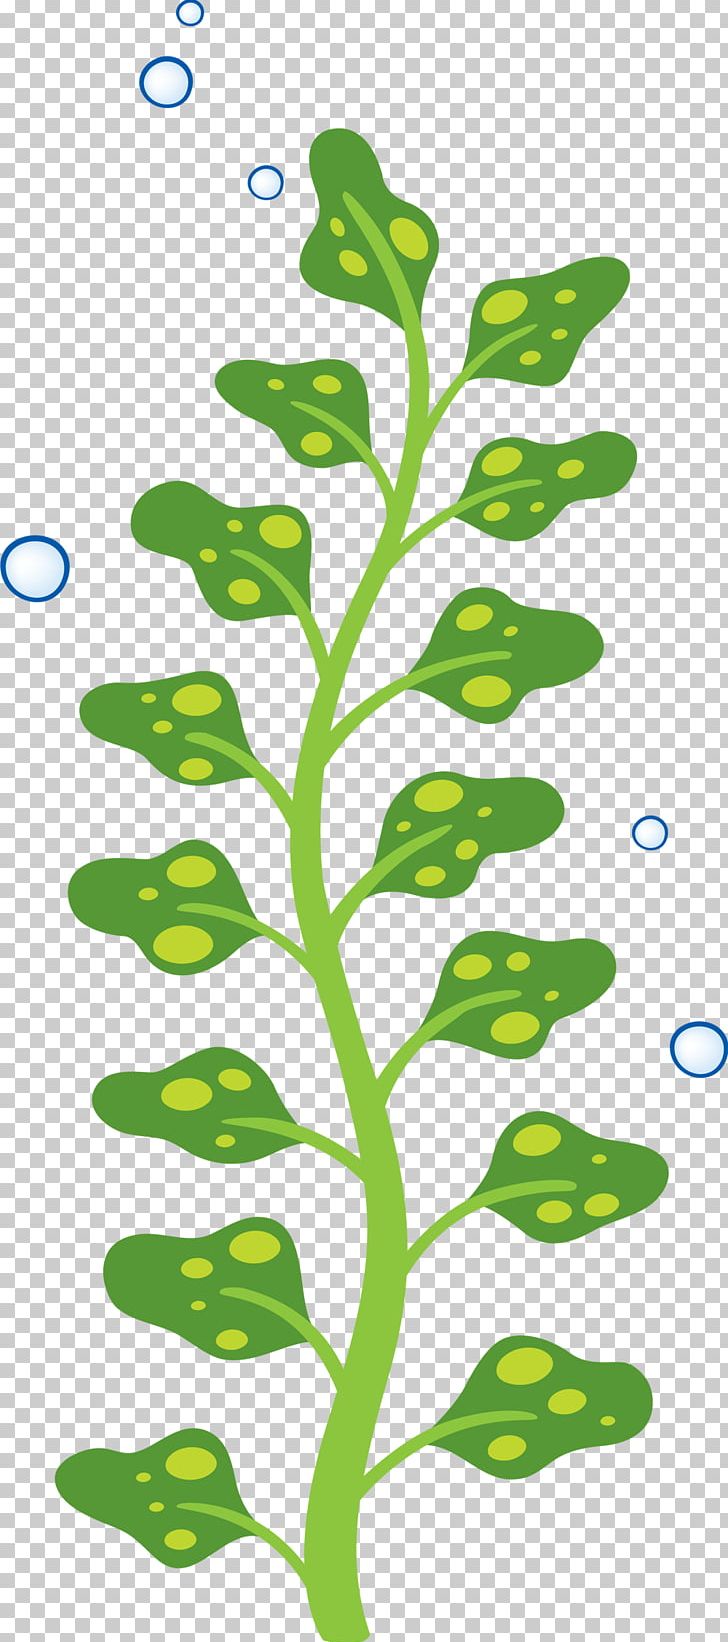 Sticker Child Parede Wall Algae PNG, Clipart, Alga, Algae, Branch, Child, Decal Free PNG Download